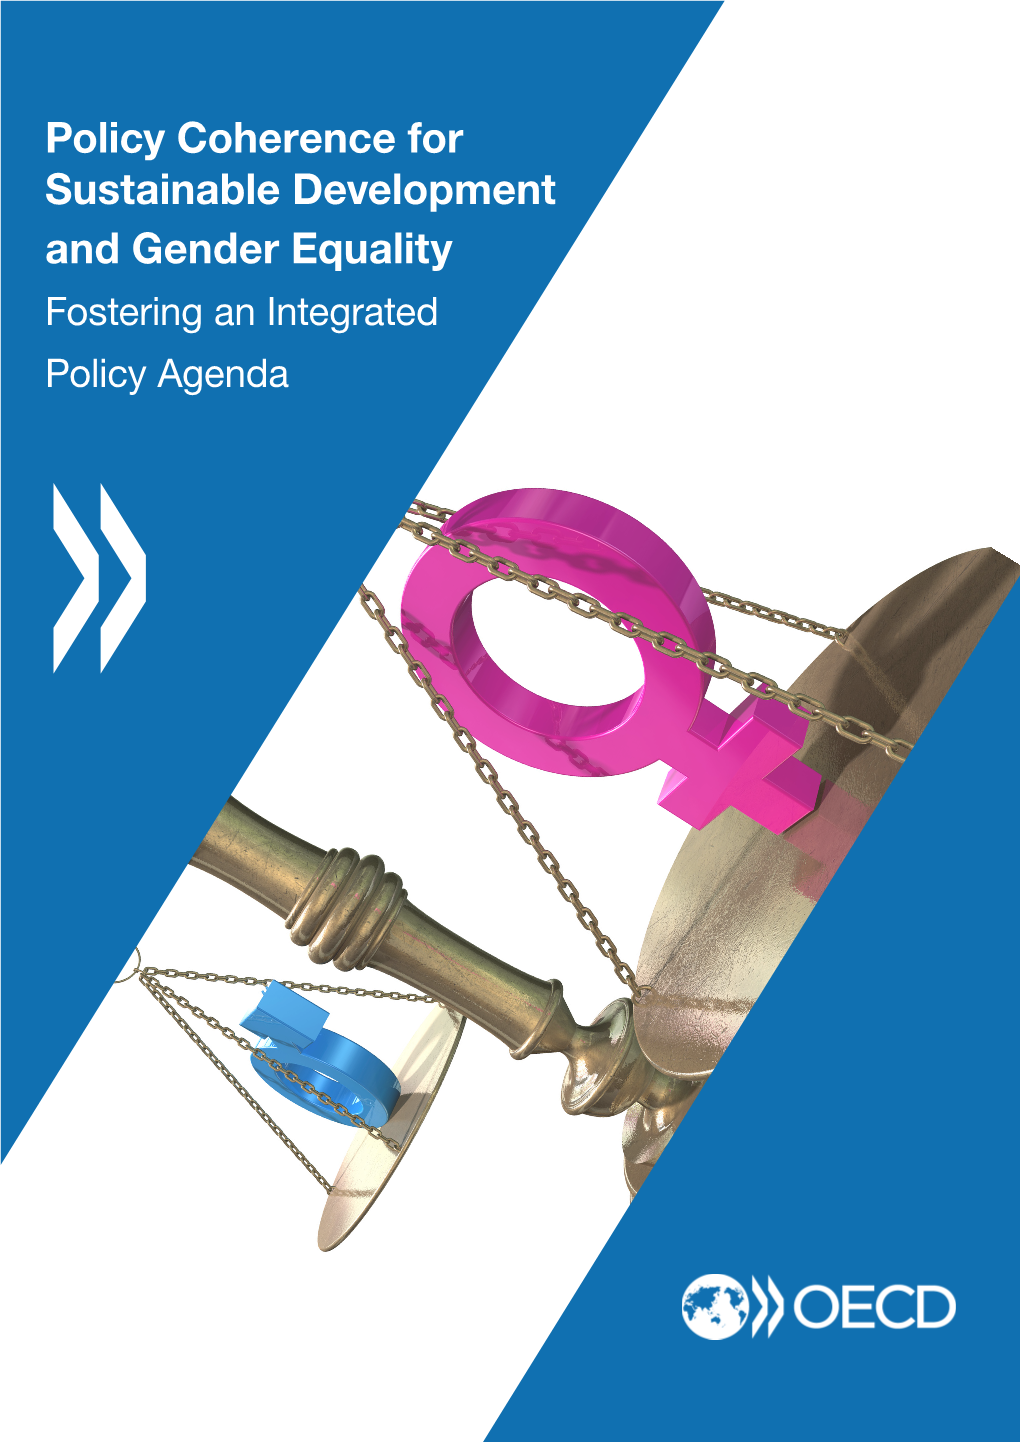 Policy Coherence for Sustainable Development and Gender Equality Fostering an Integrated Policy Agenda 2 │